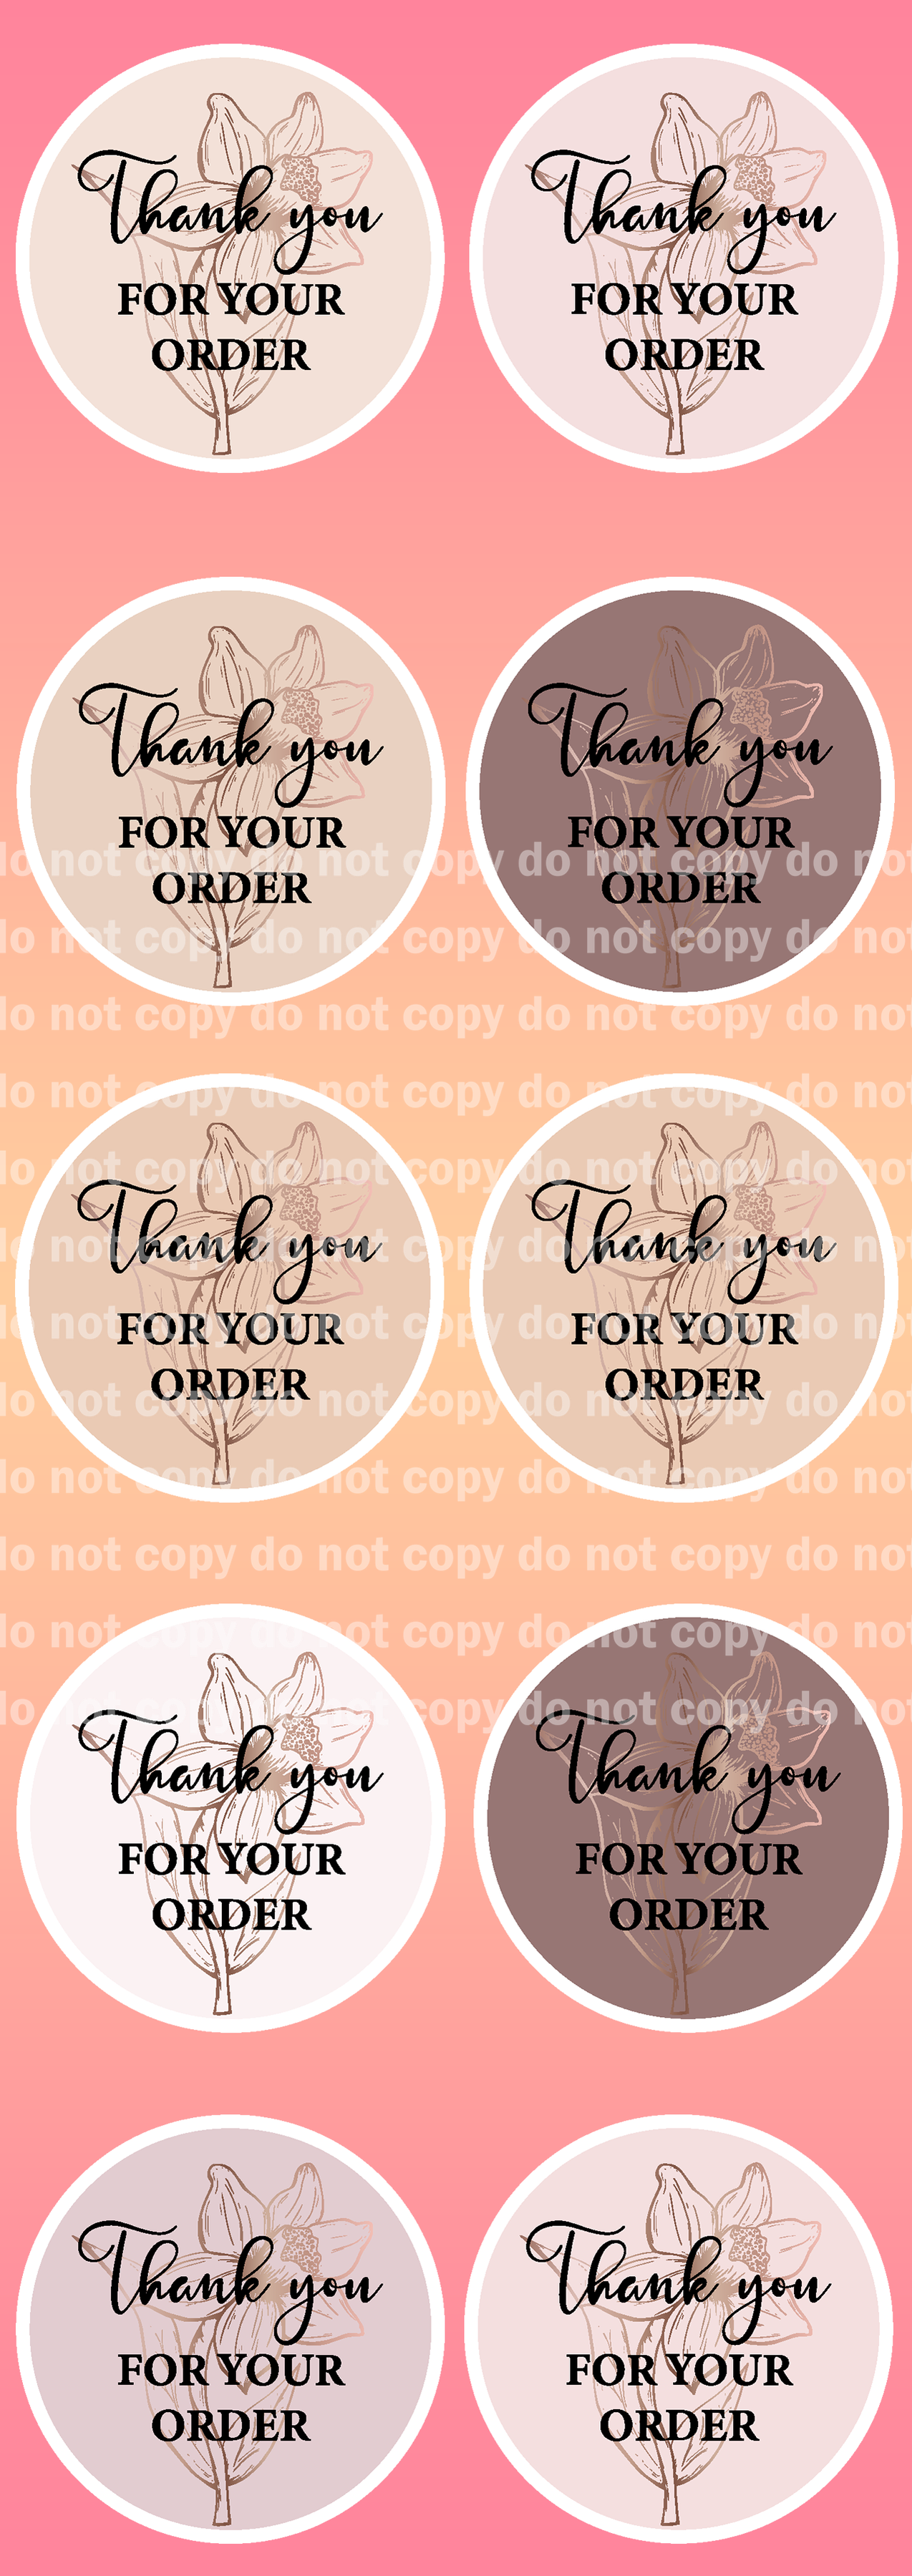 Thank you for your order Sticker Set - 10pcs Glossy Stickers per sheet